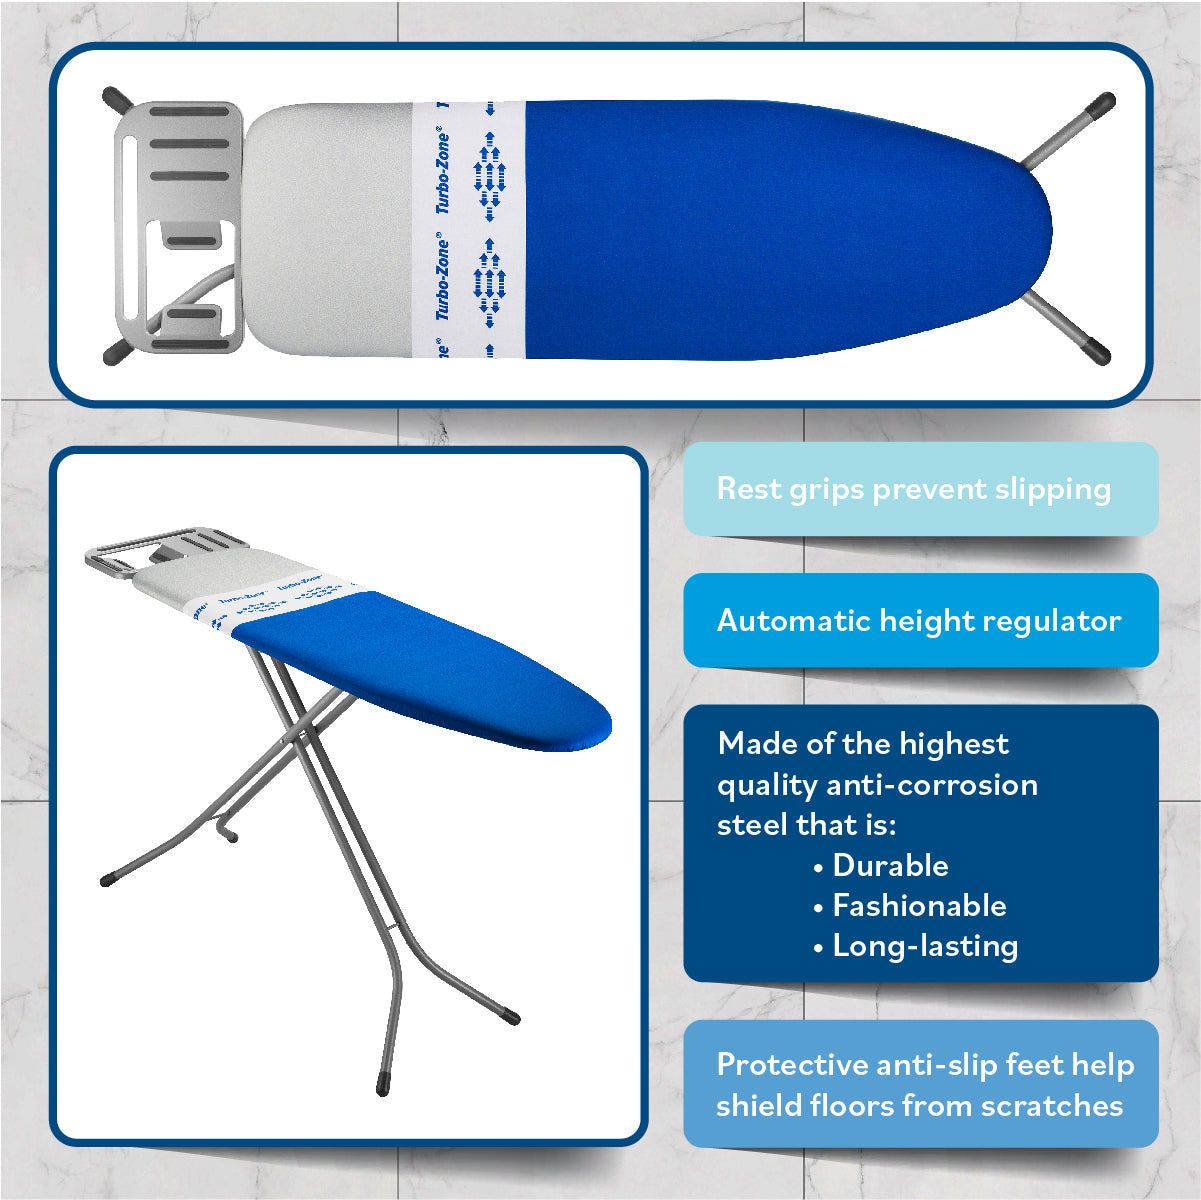 Bartnelli Heavy Duty Ironing Board 48x15 | Designed & Made in Europe with Patent Technology, Turbo & Park Zone, Features: 4 Layer Cover &Pad,Height-Adjustable,4 Premium Steel Legs,Upgraded Iron Rest (BLUE)